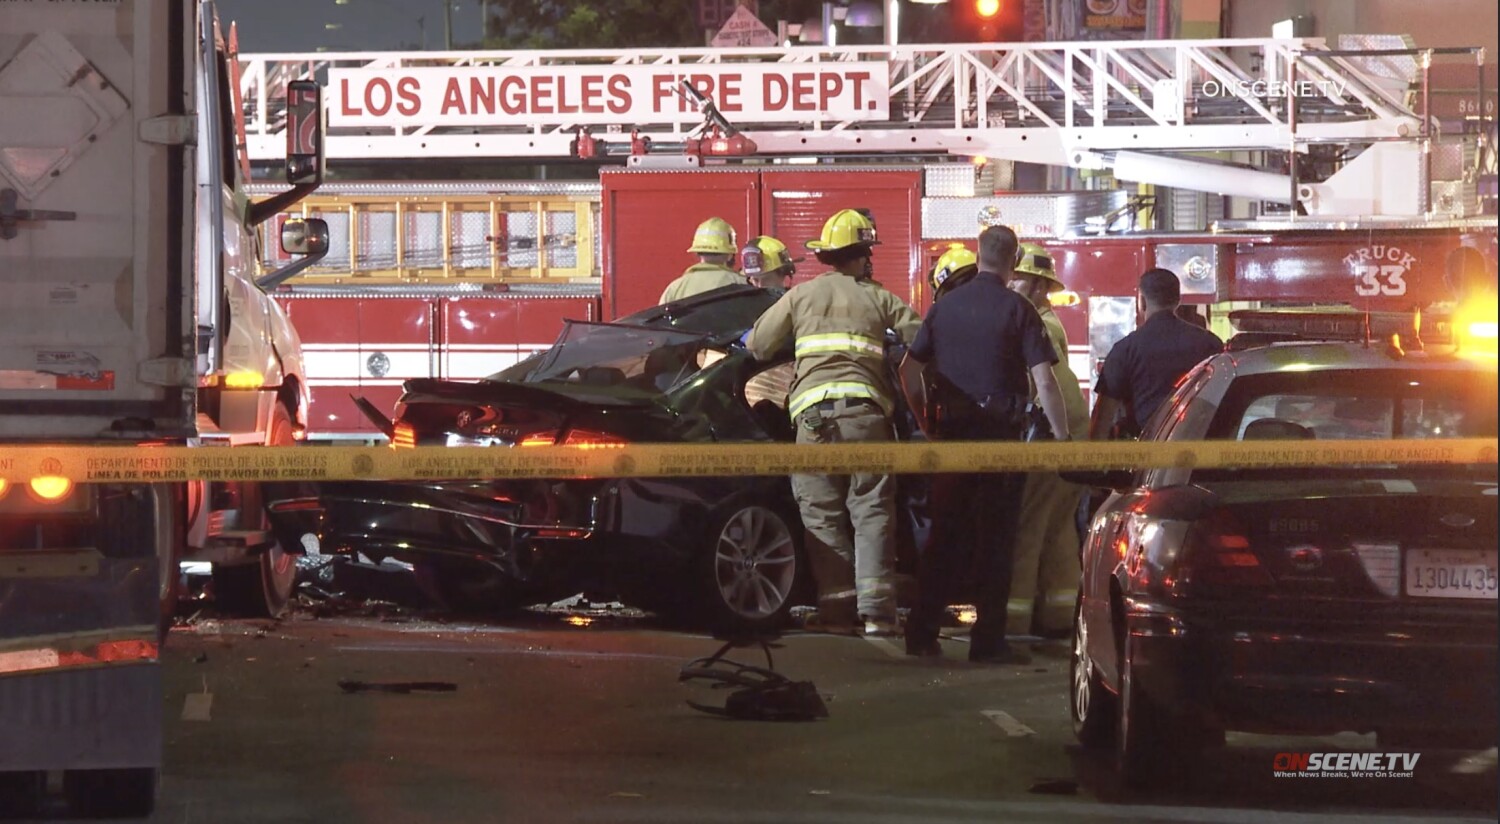 Two bystanders were killed during LAPD high-speed chase. Chief now vows action